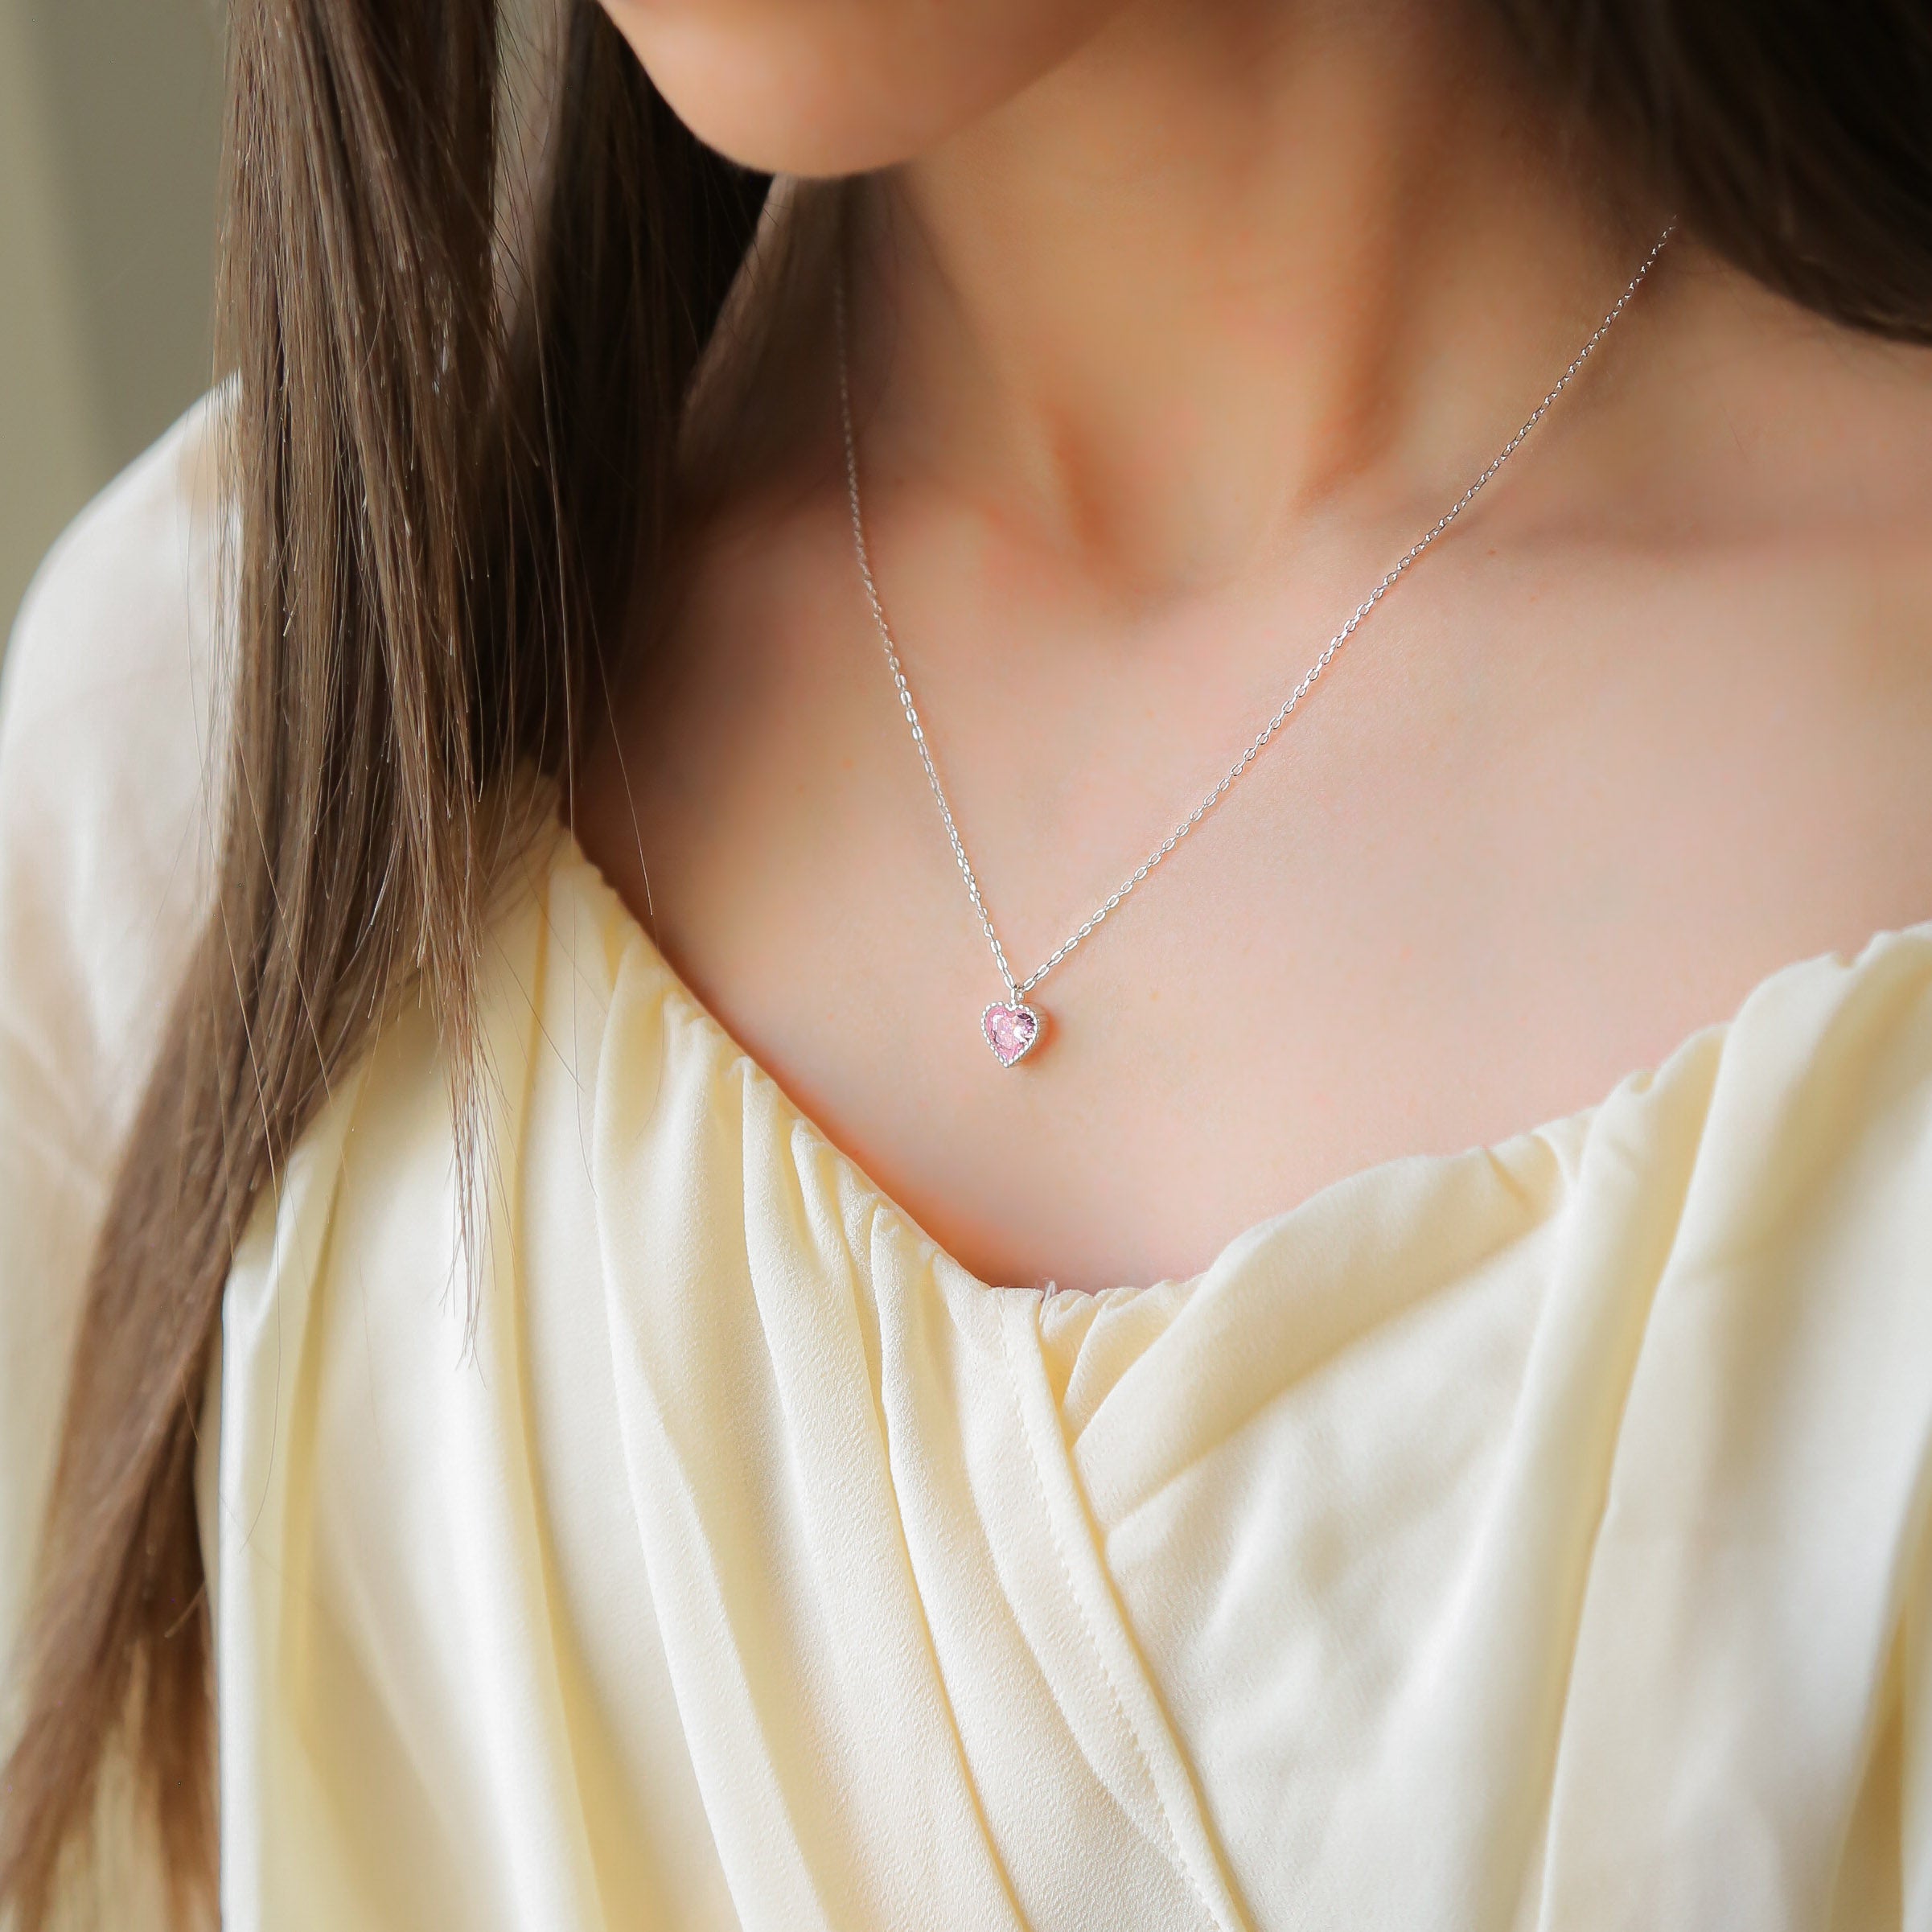 SWEET TALK - 925 Sterling Silver Necklace with Pink Zircon Heart